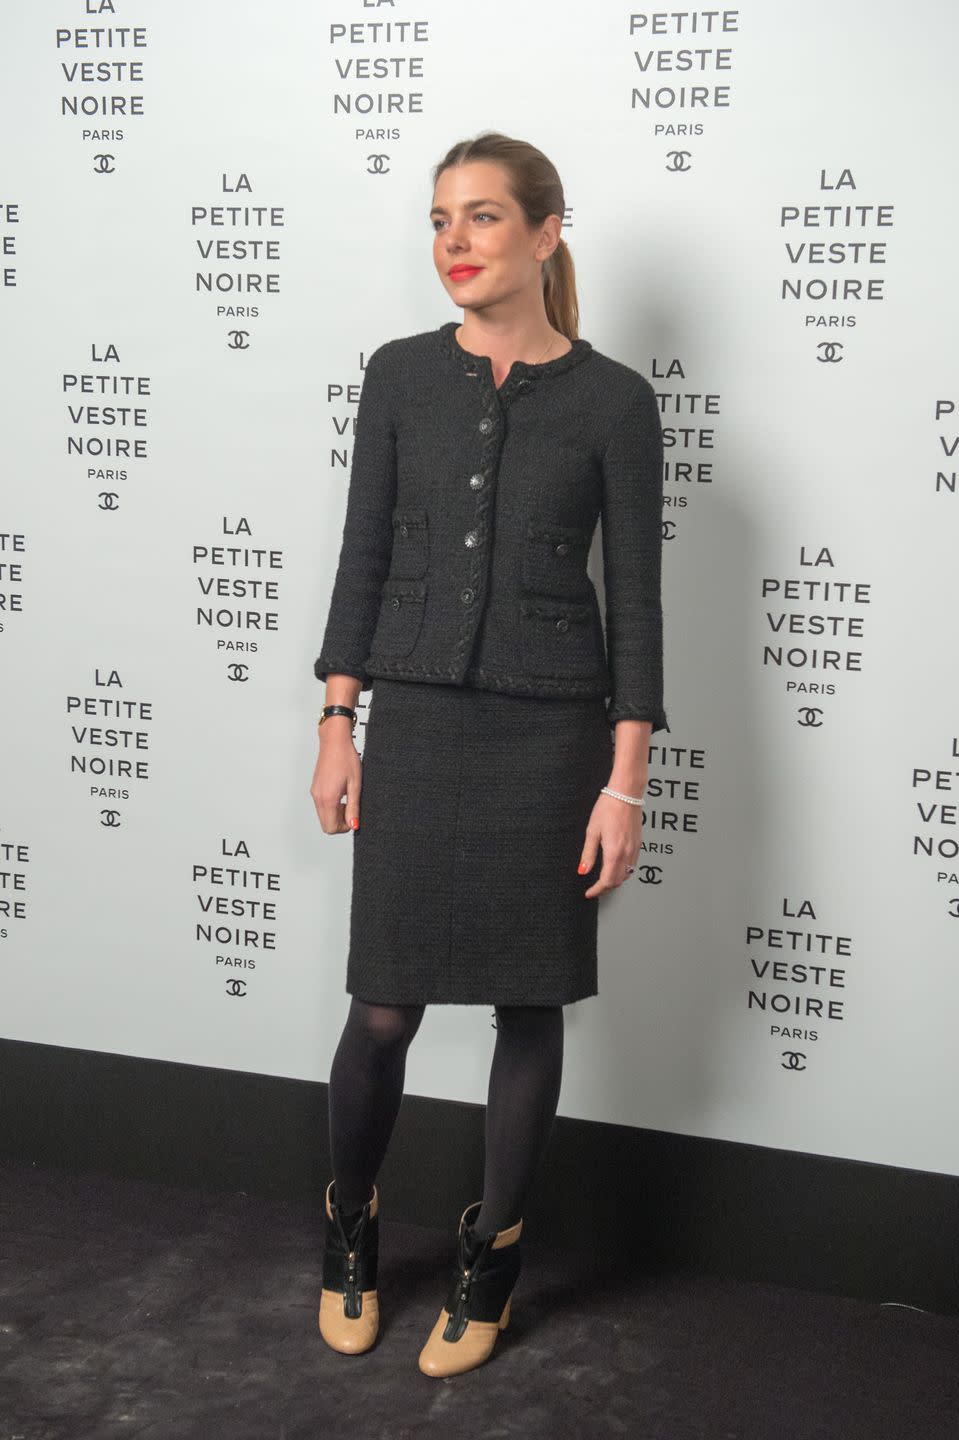 la petite veste noire book launch hosted by karl lagerfeld and carine roitfeld